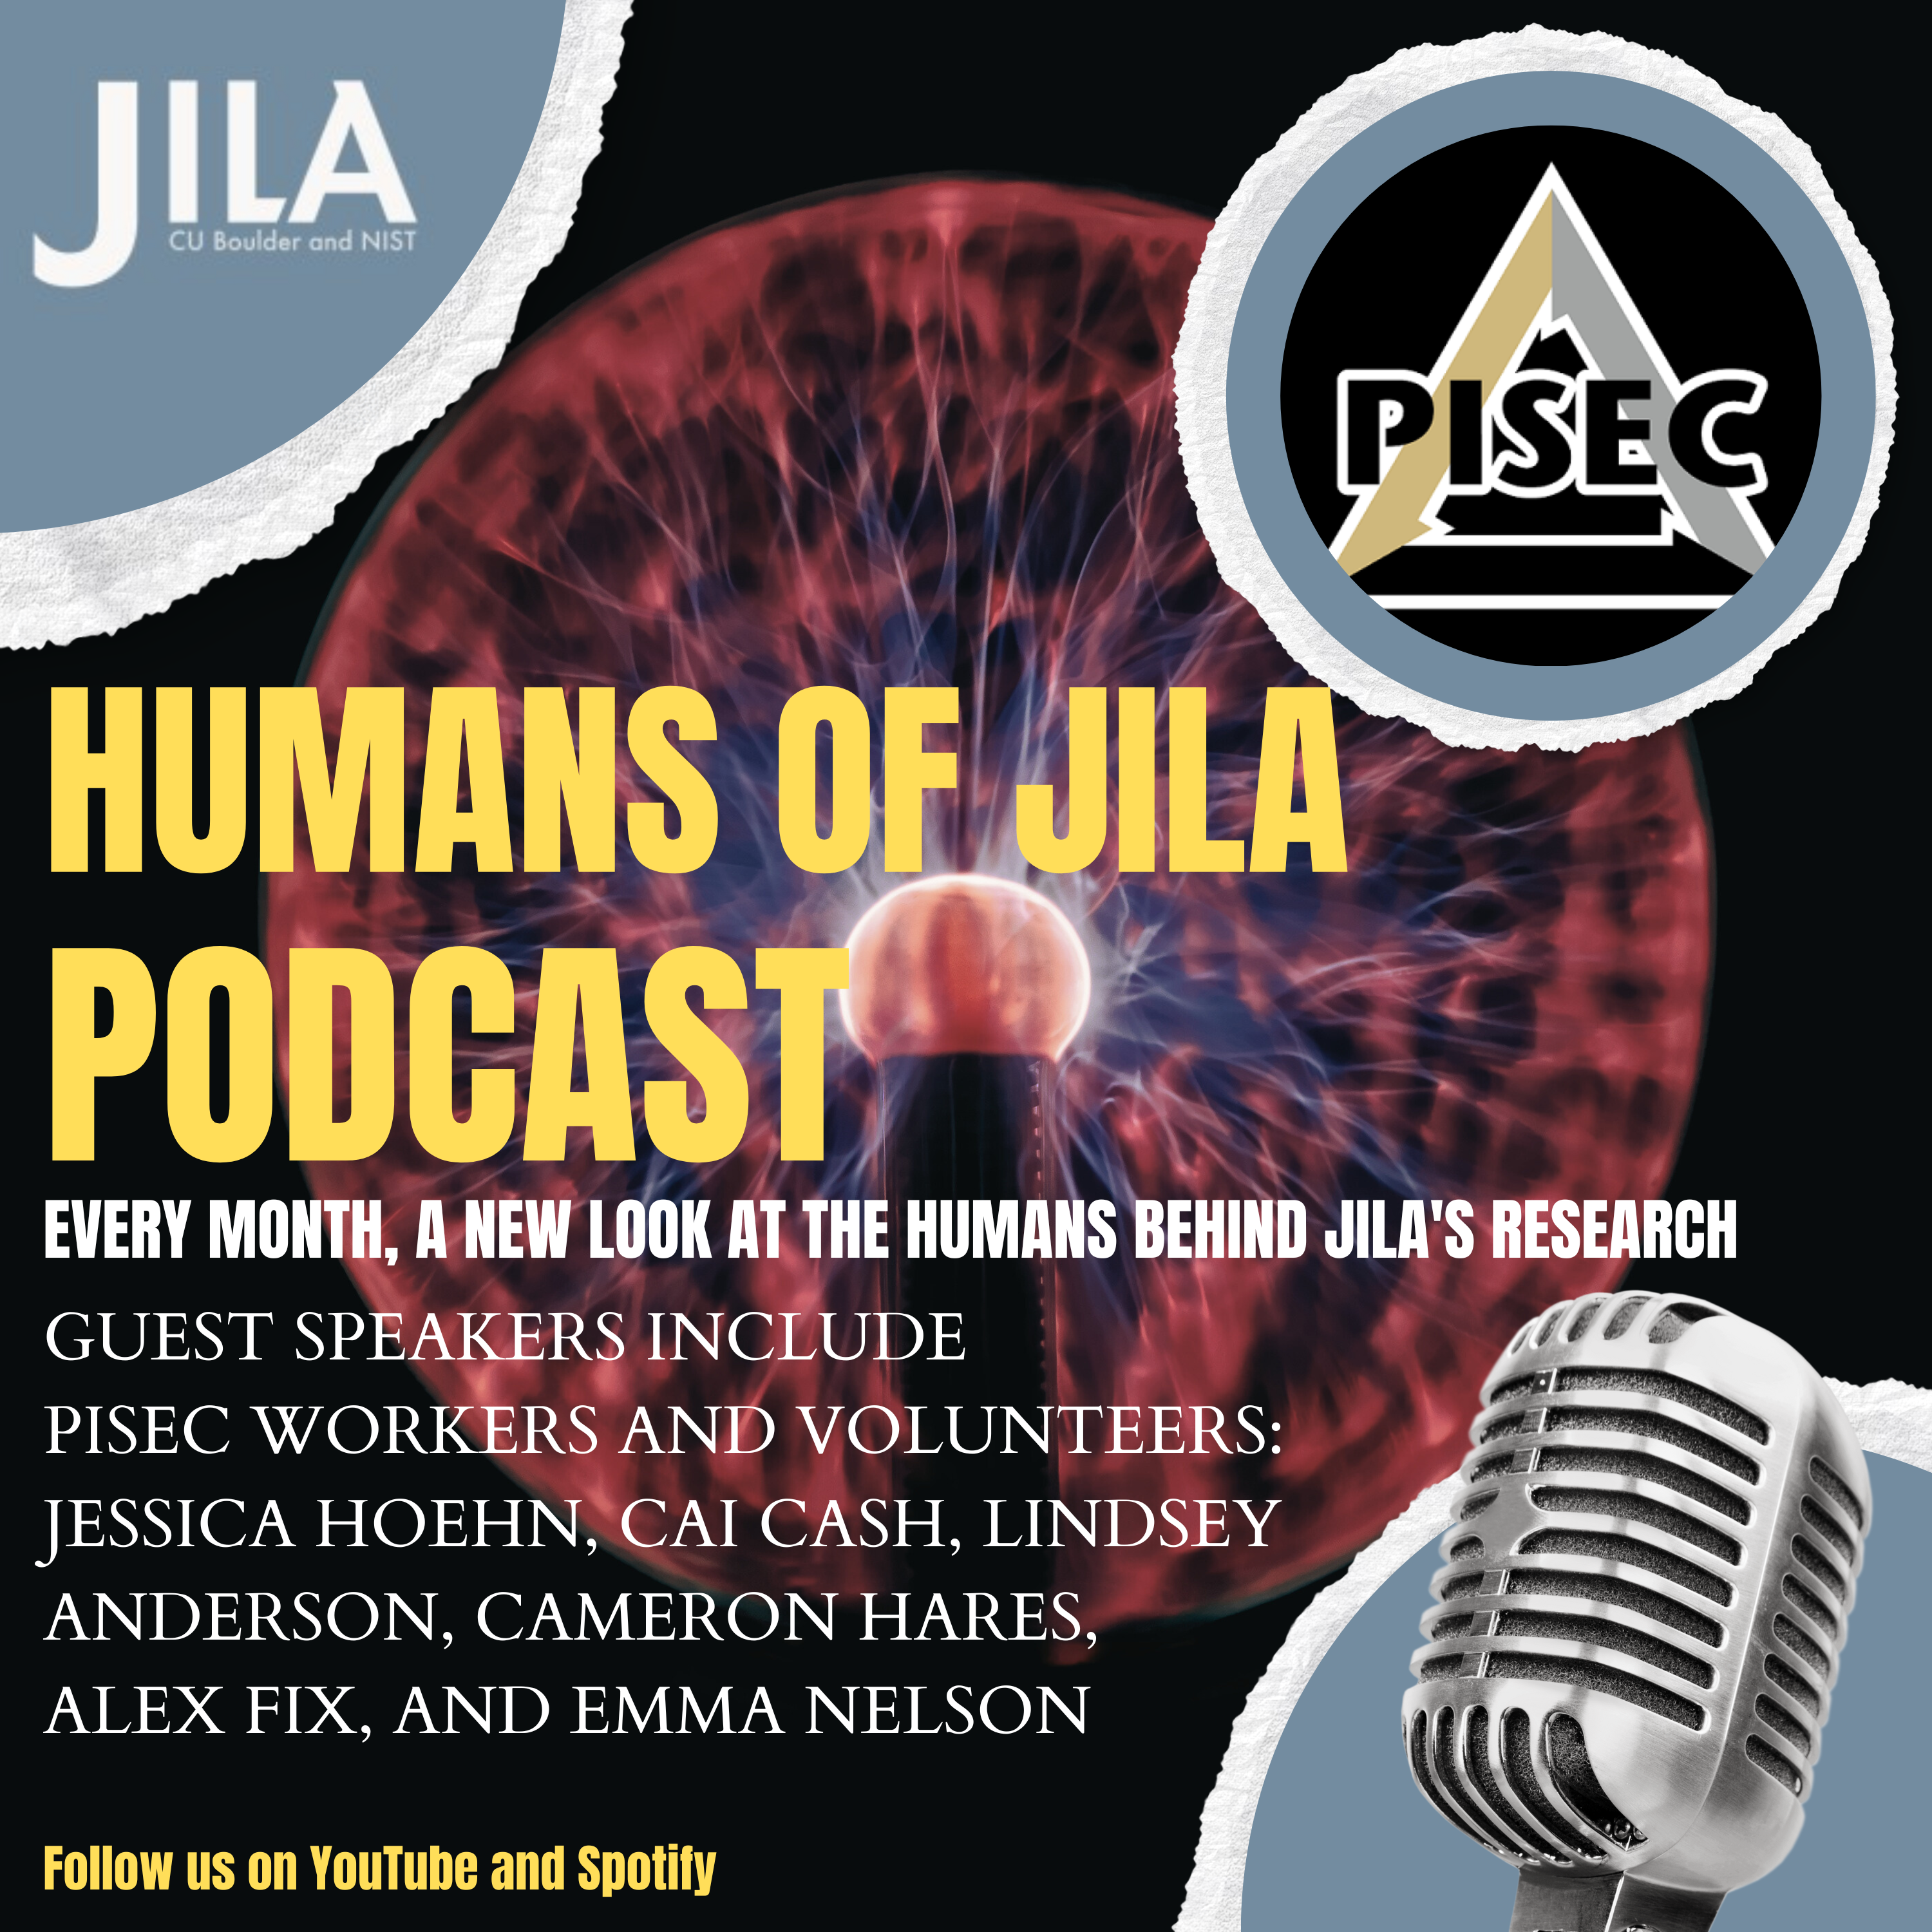 Humans of JILA podcast poster